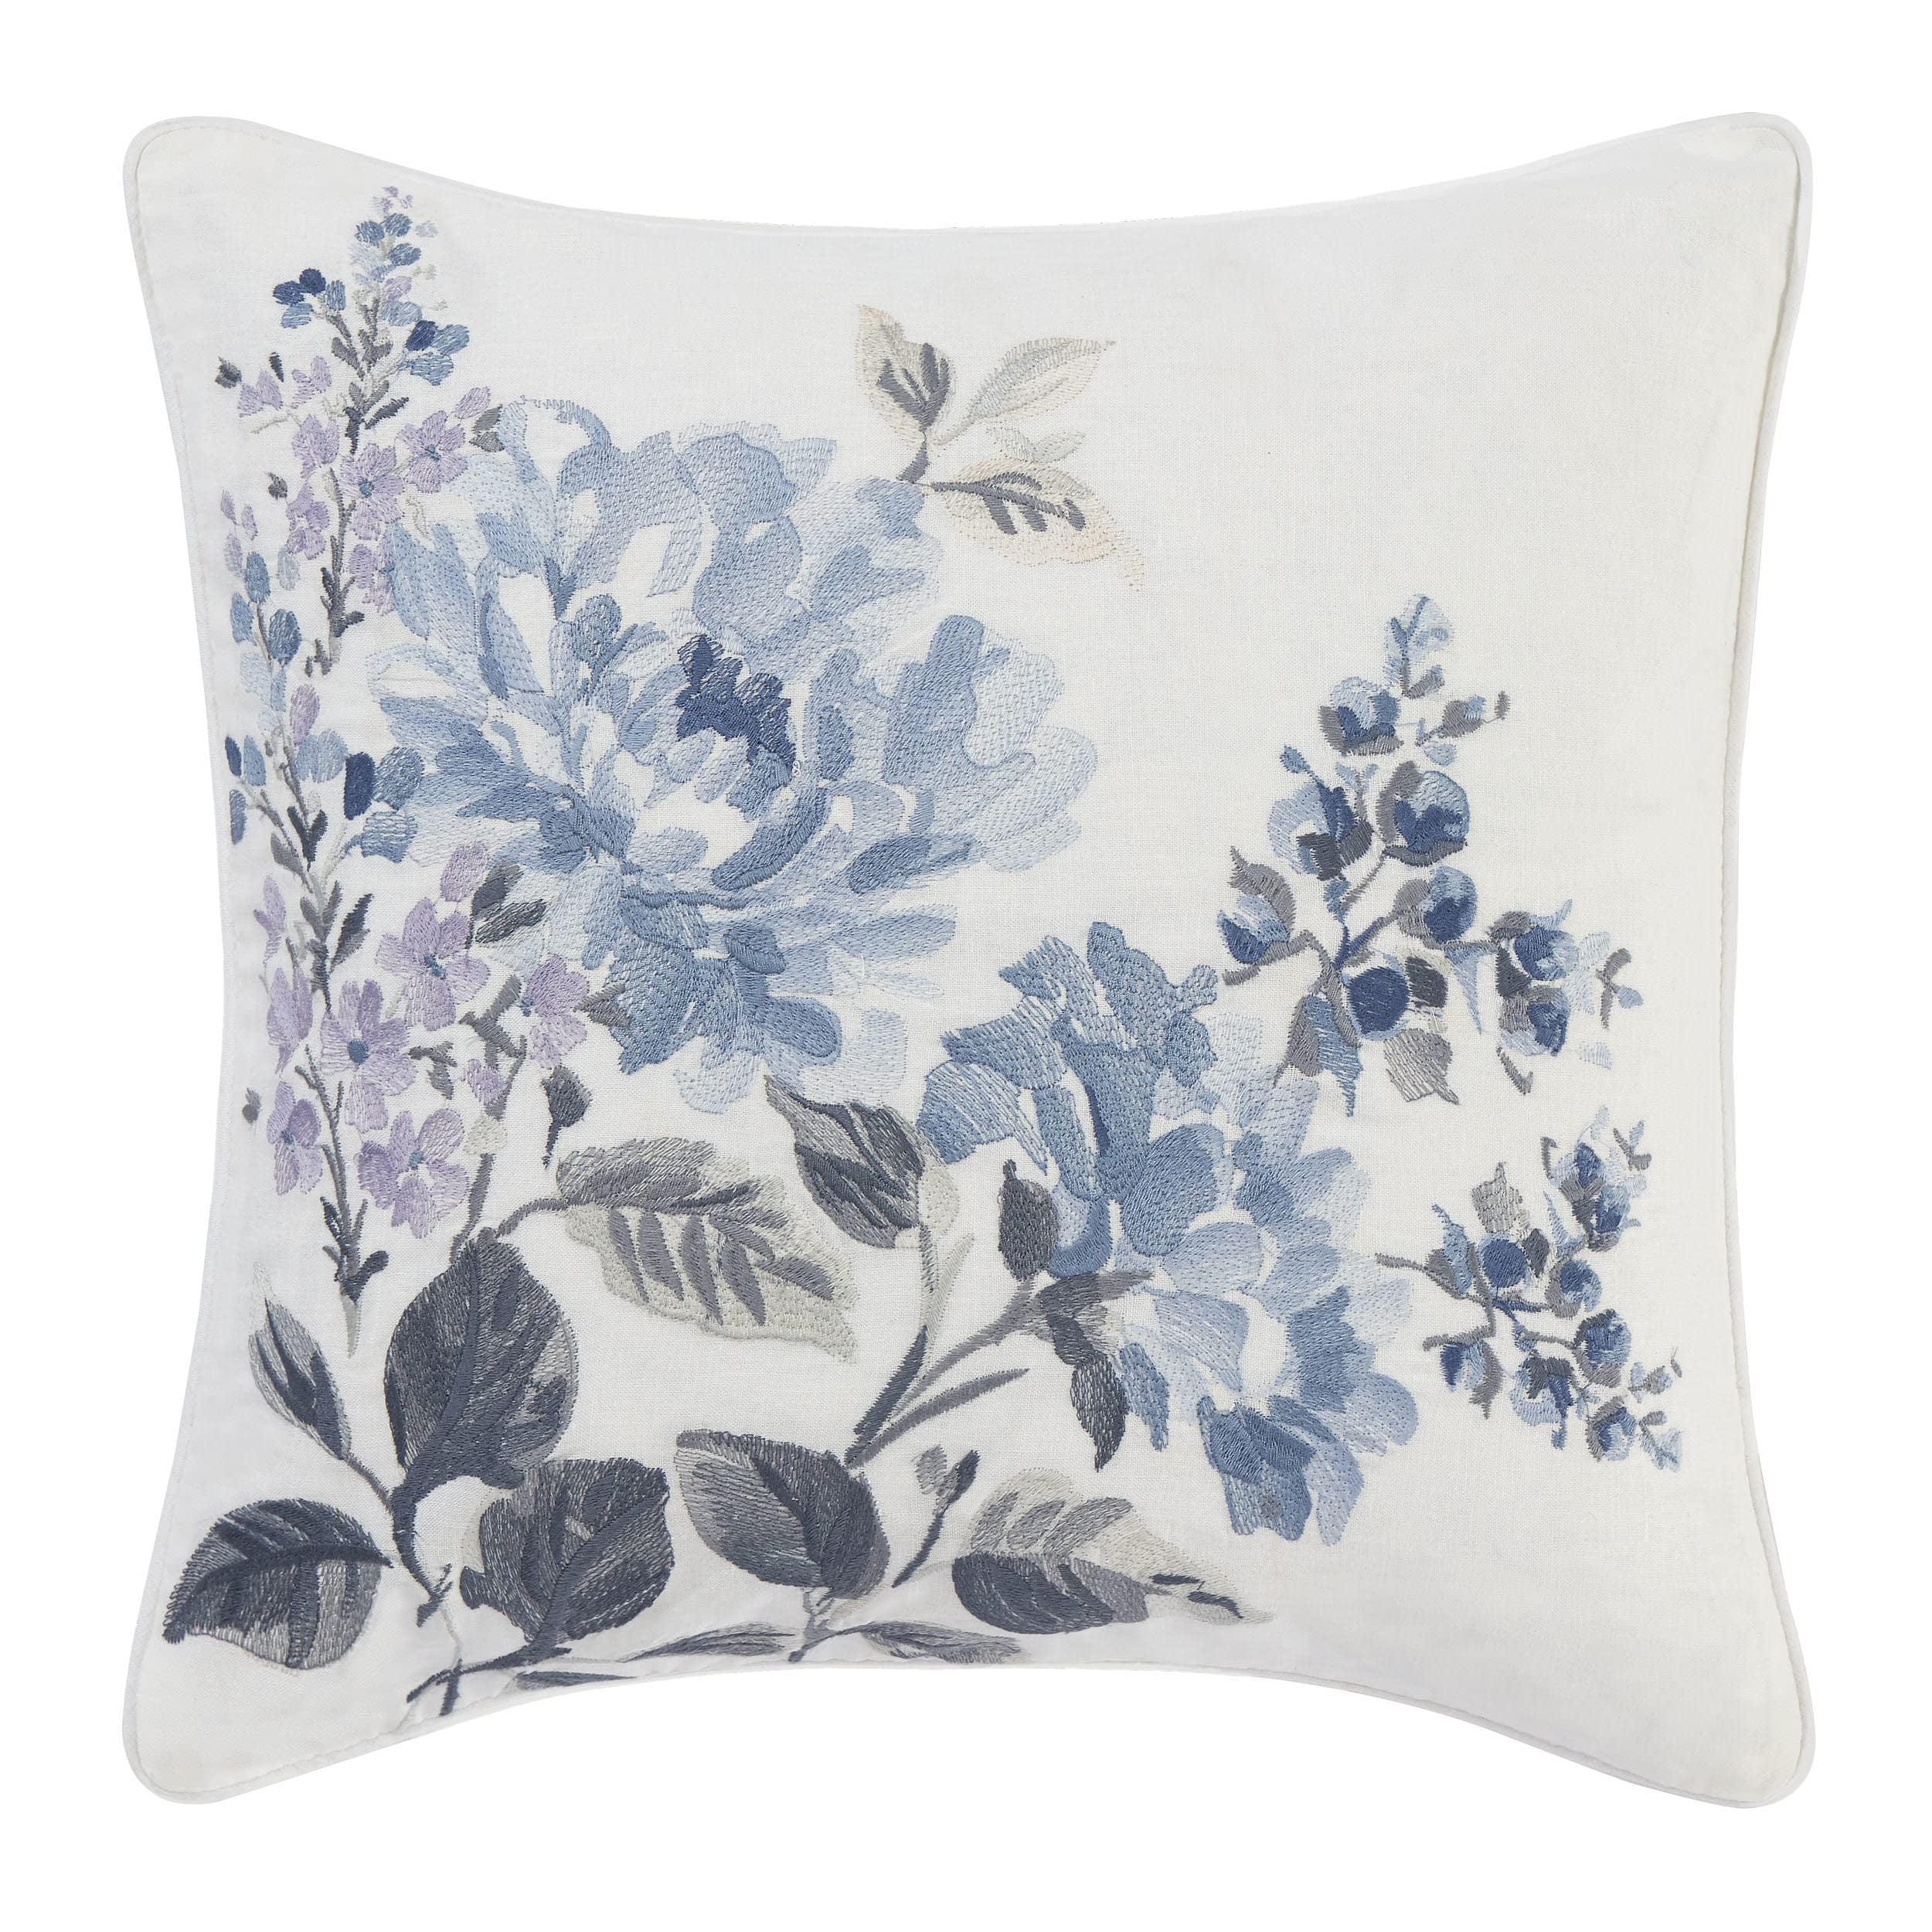 Chloe 16" Blue and White Embroidered Floral Throw Pillow